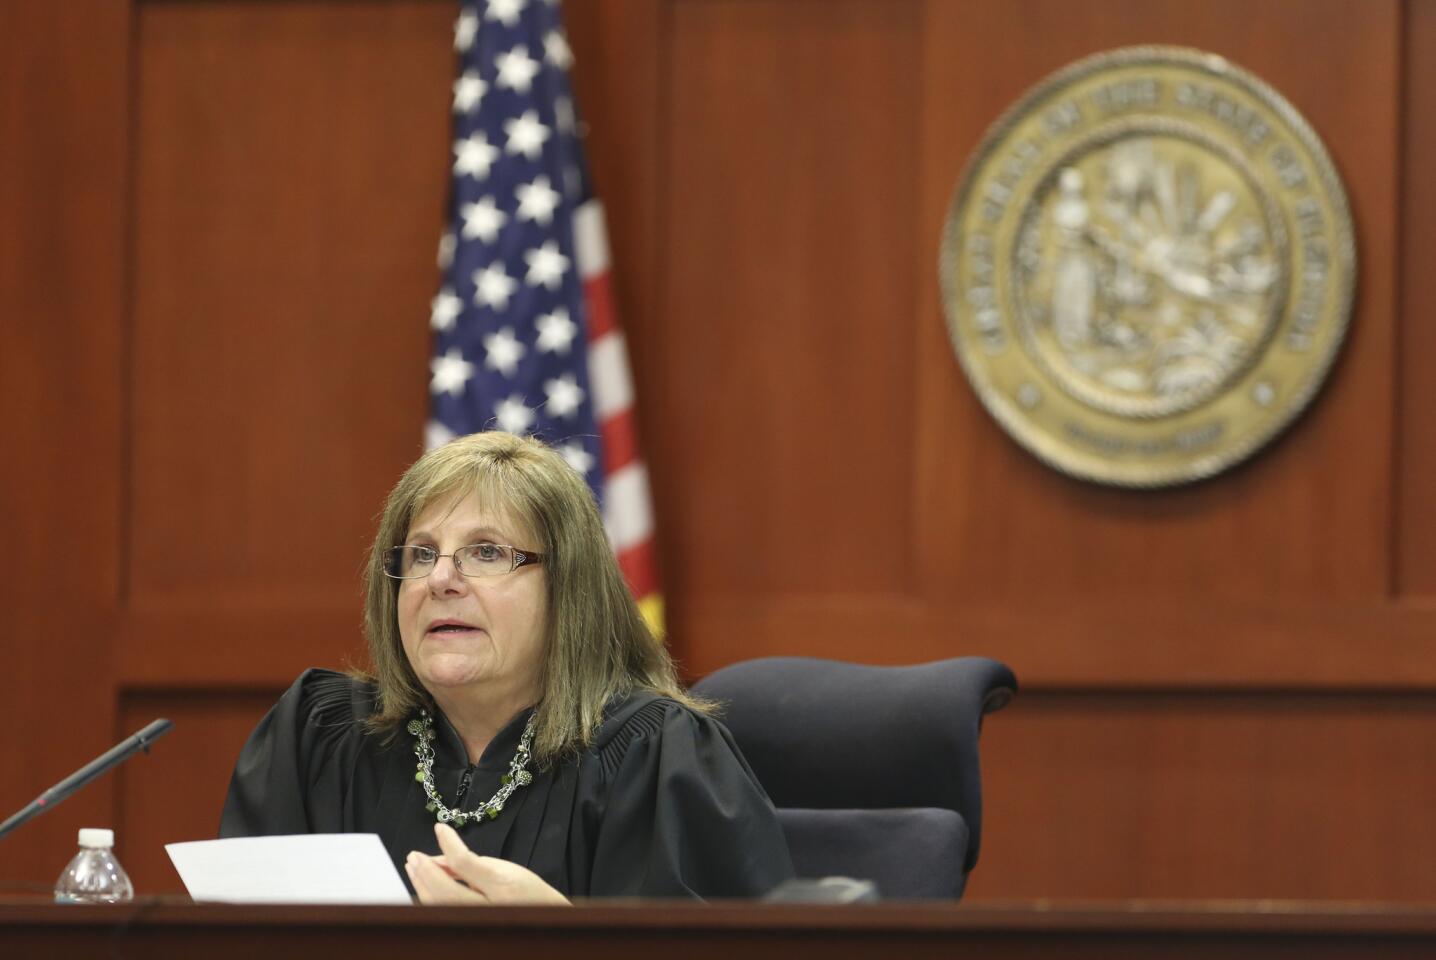 Judge Debra Nelson rules on some key issues at the end of the day during George Zimmerman's trial in Seminole circuit court in Sanford, Fla. Wednesday, July 10, 2013. Zimmerman has been charged with second-degree murder for the 2012 shooting death of Trayvon Martin. (Gary W. Green/Orlando Sentinel)